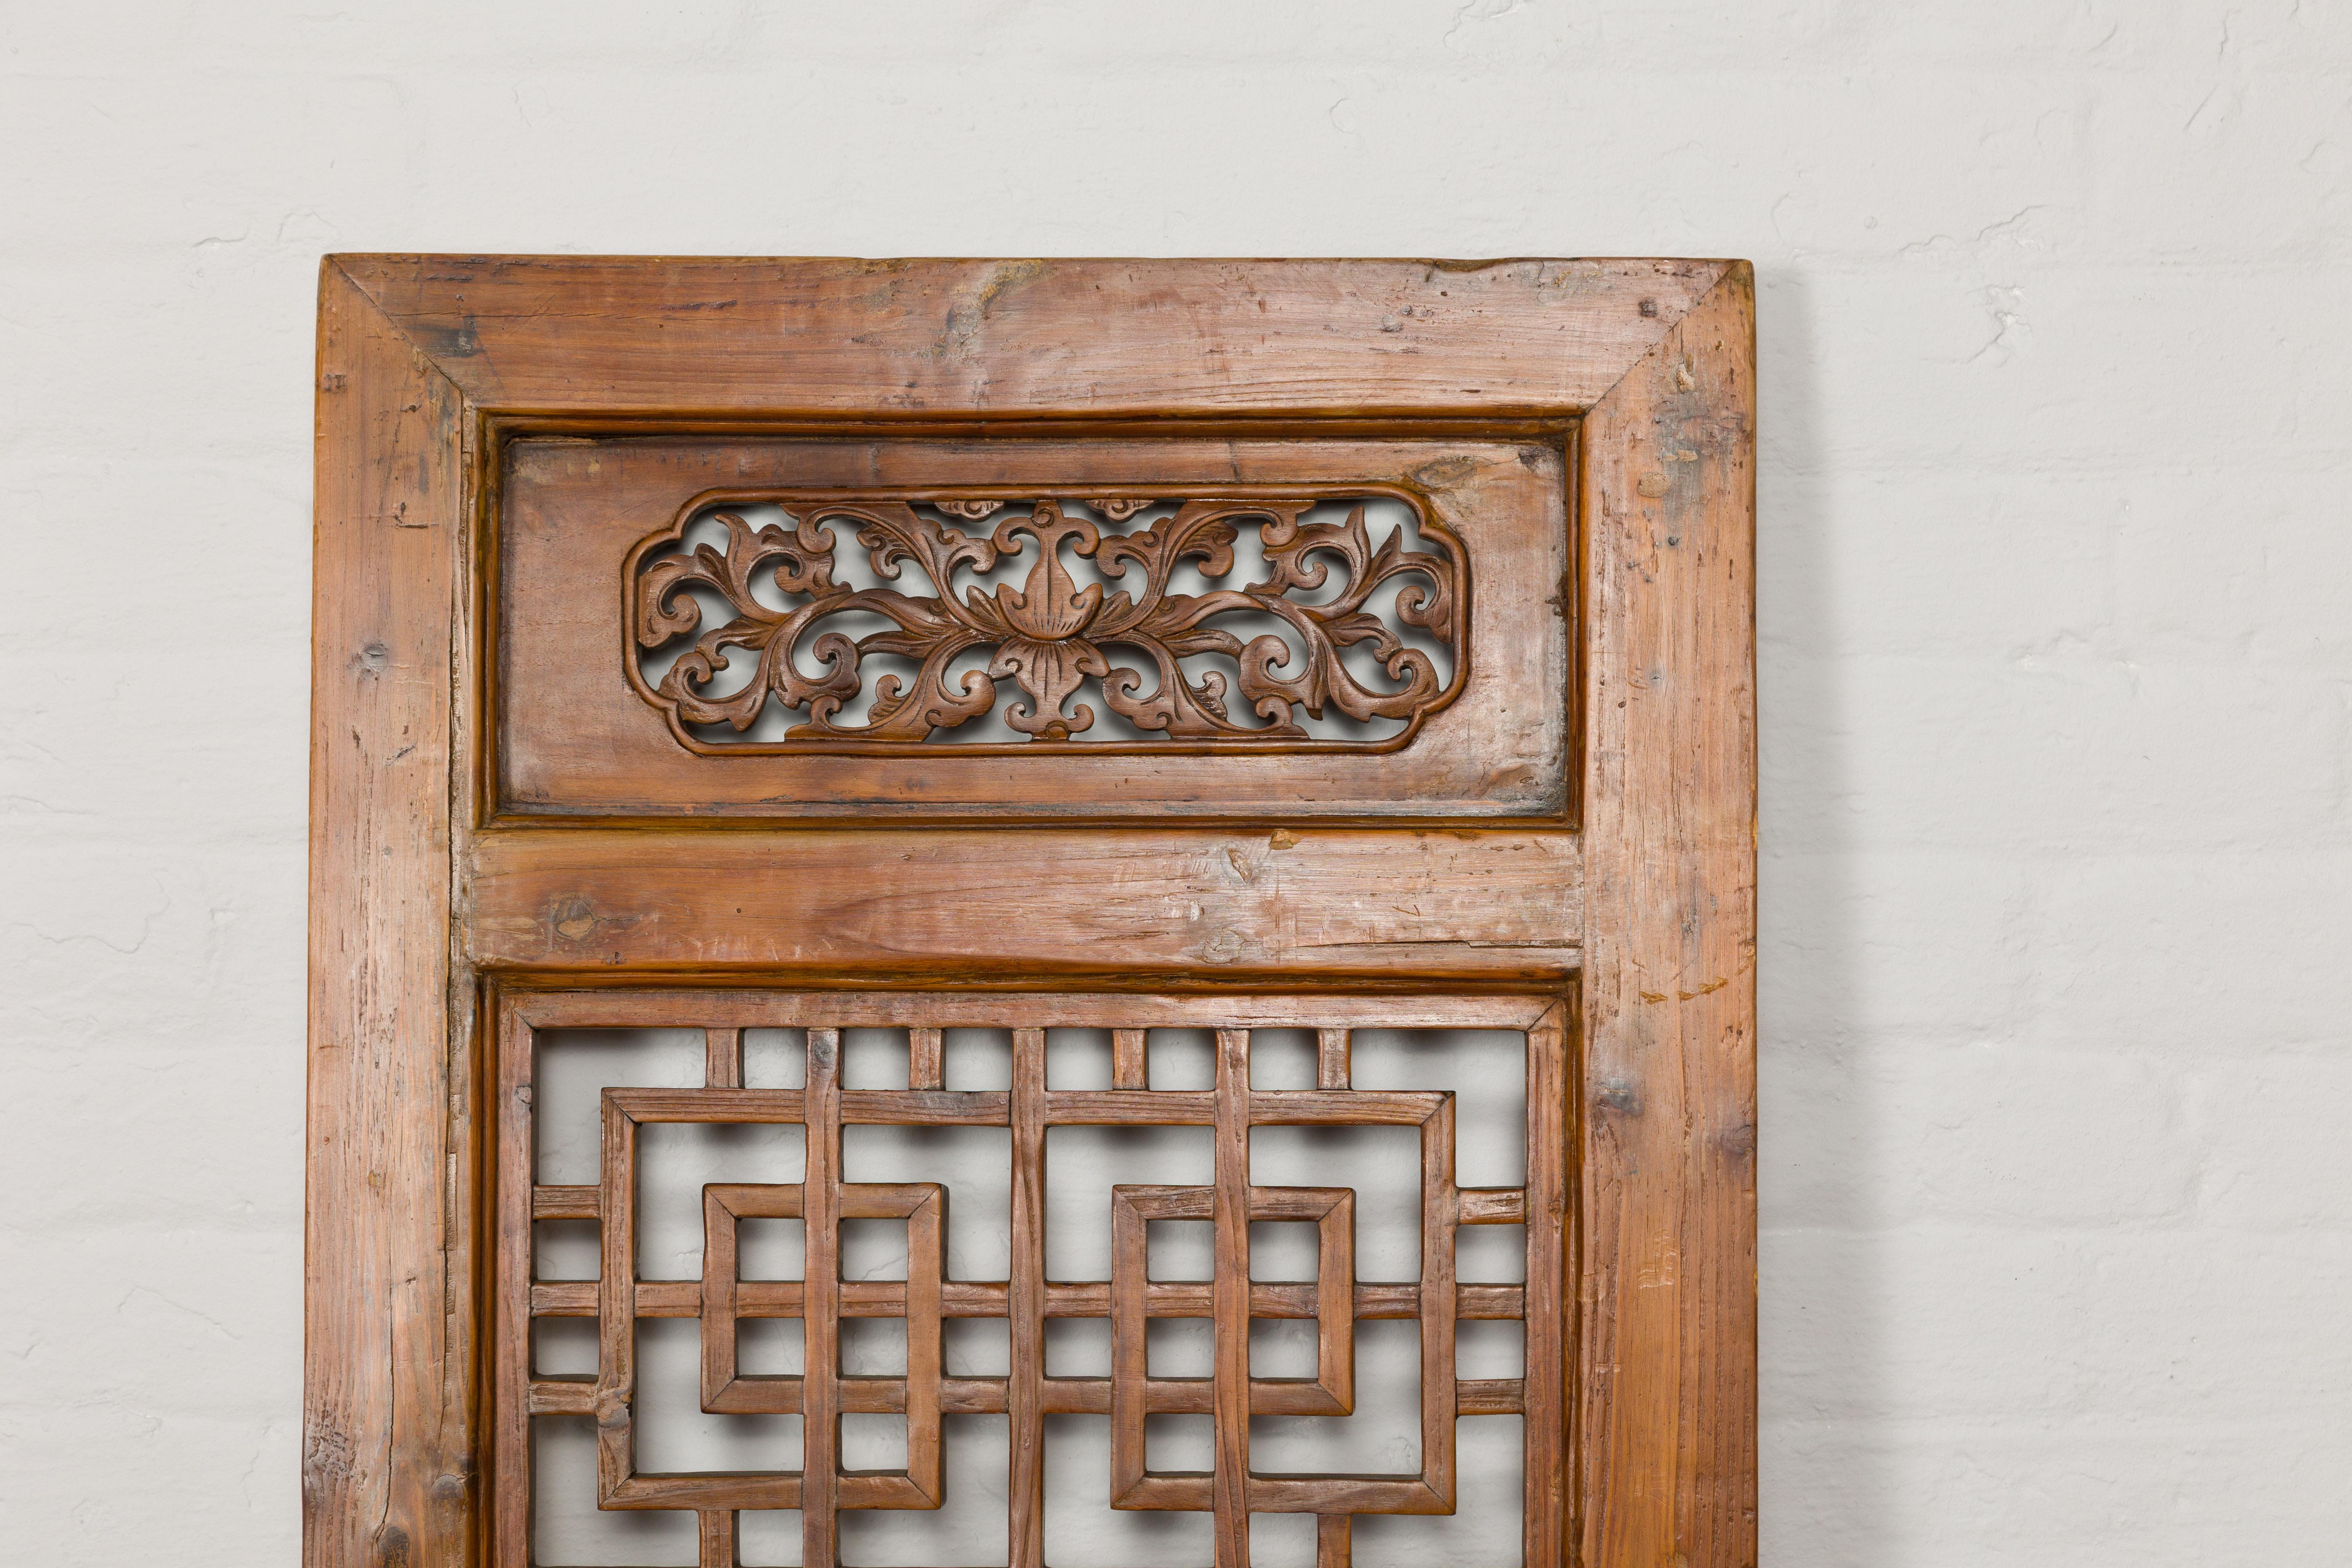 Chinese Qing Dynasty 19th Century Fretwork Screen with Carved Scrolling Motifs For Sale 13